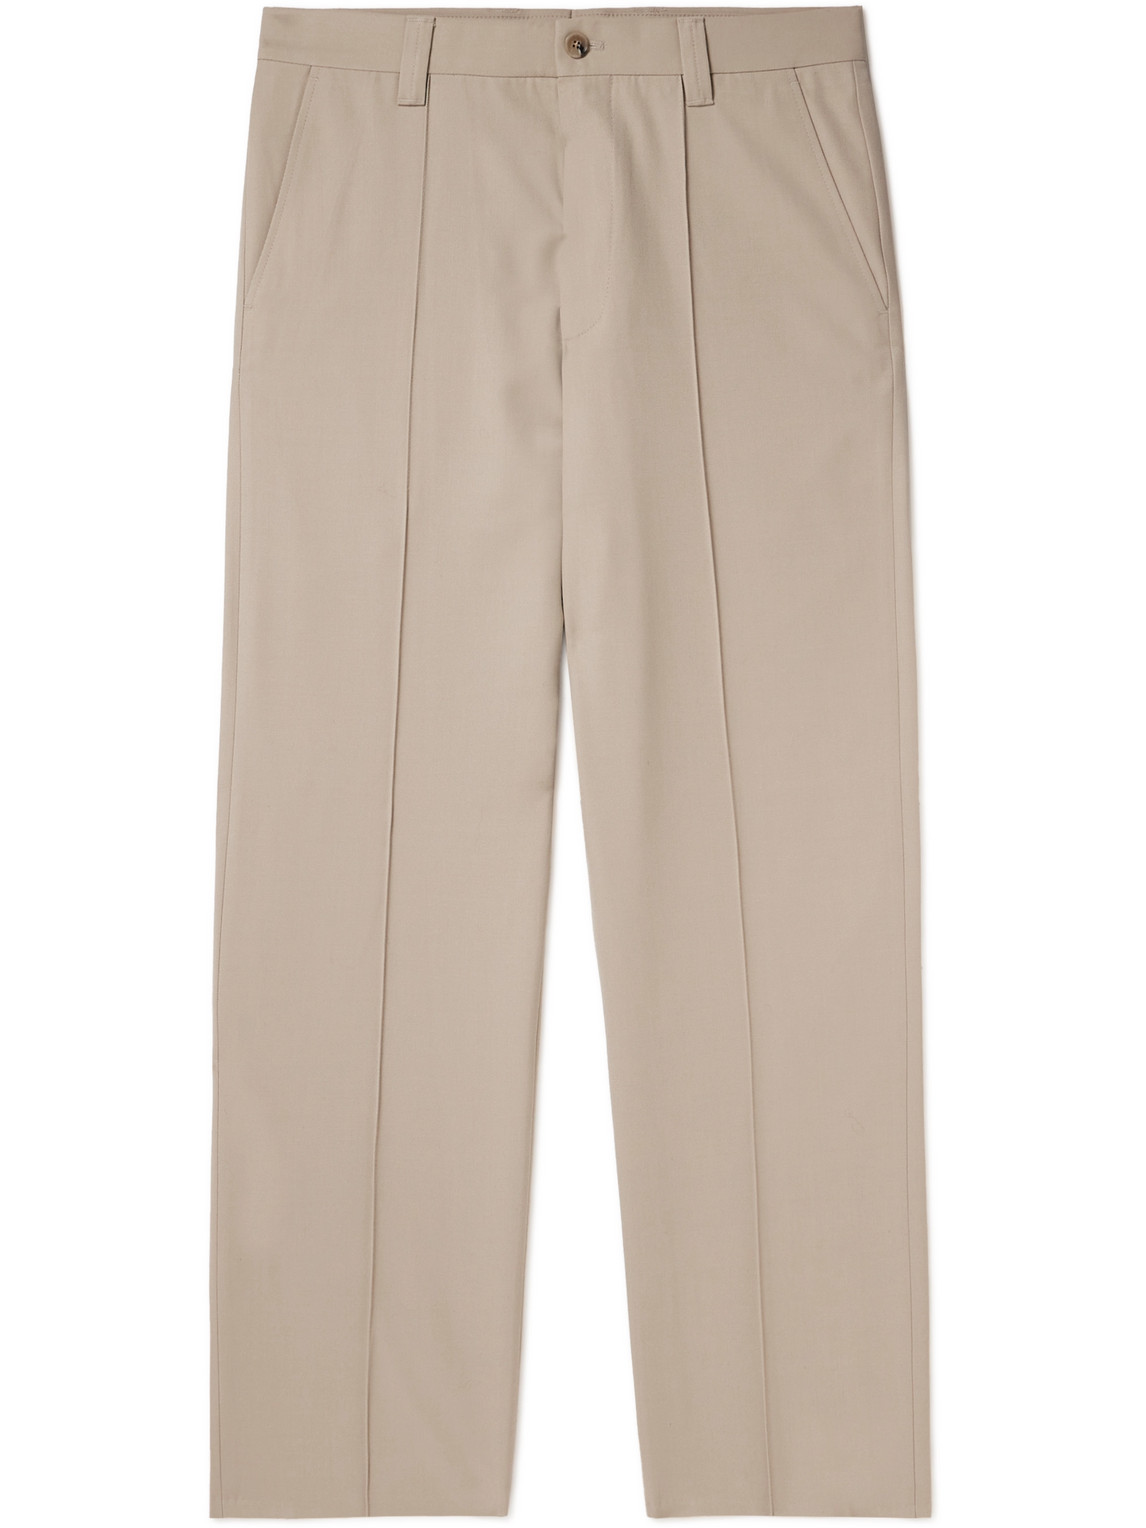 Nn07 Throwing Fits Tauber 1728 Straight-leg Pleated Twill Trousers In Neutrals